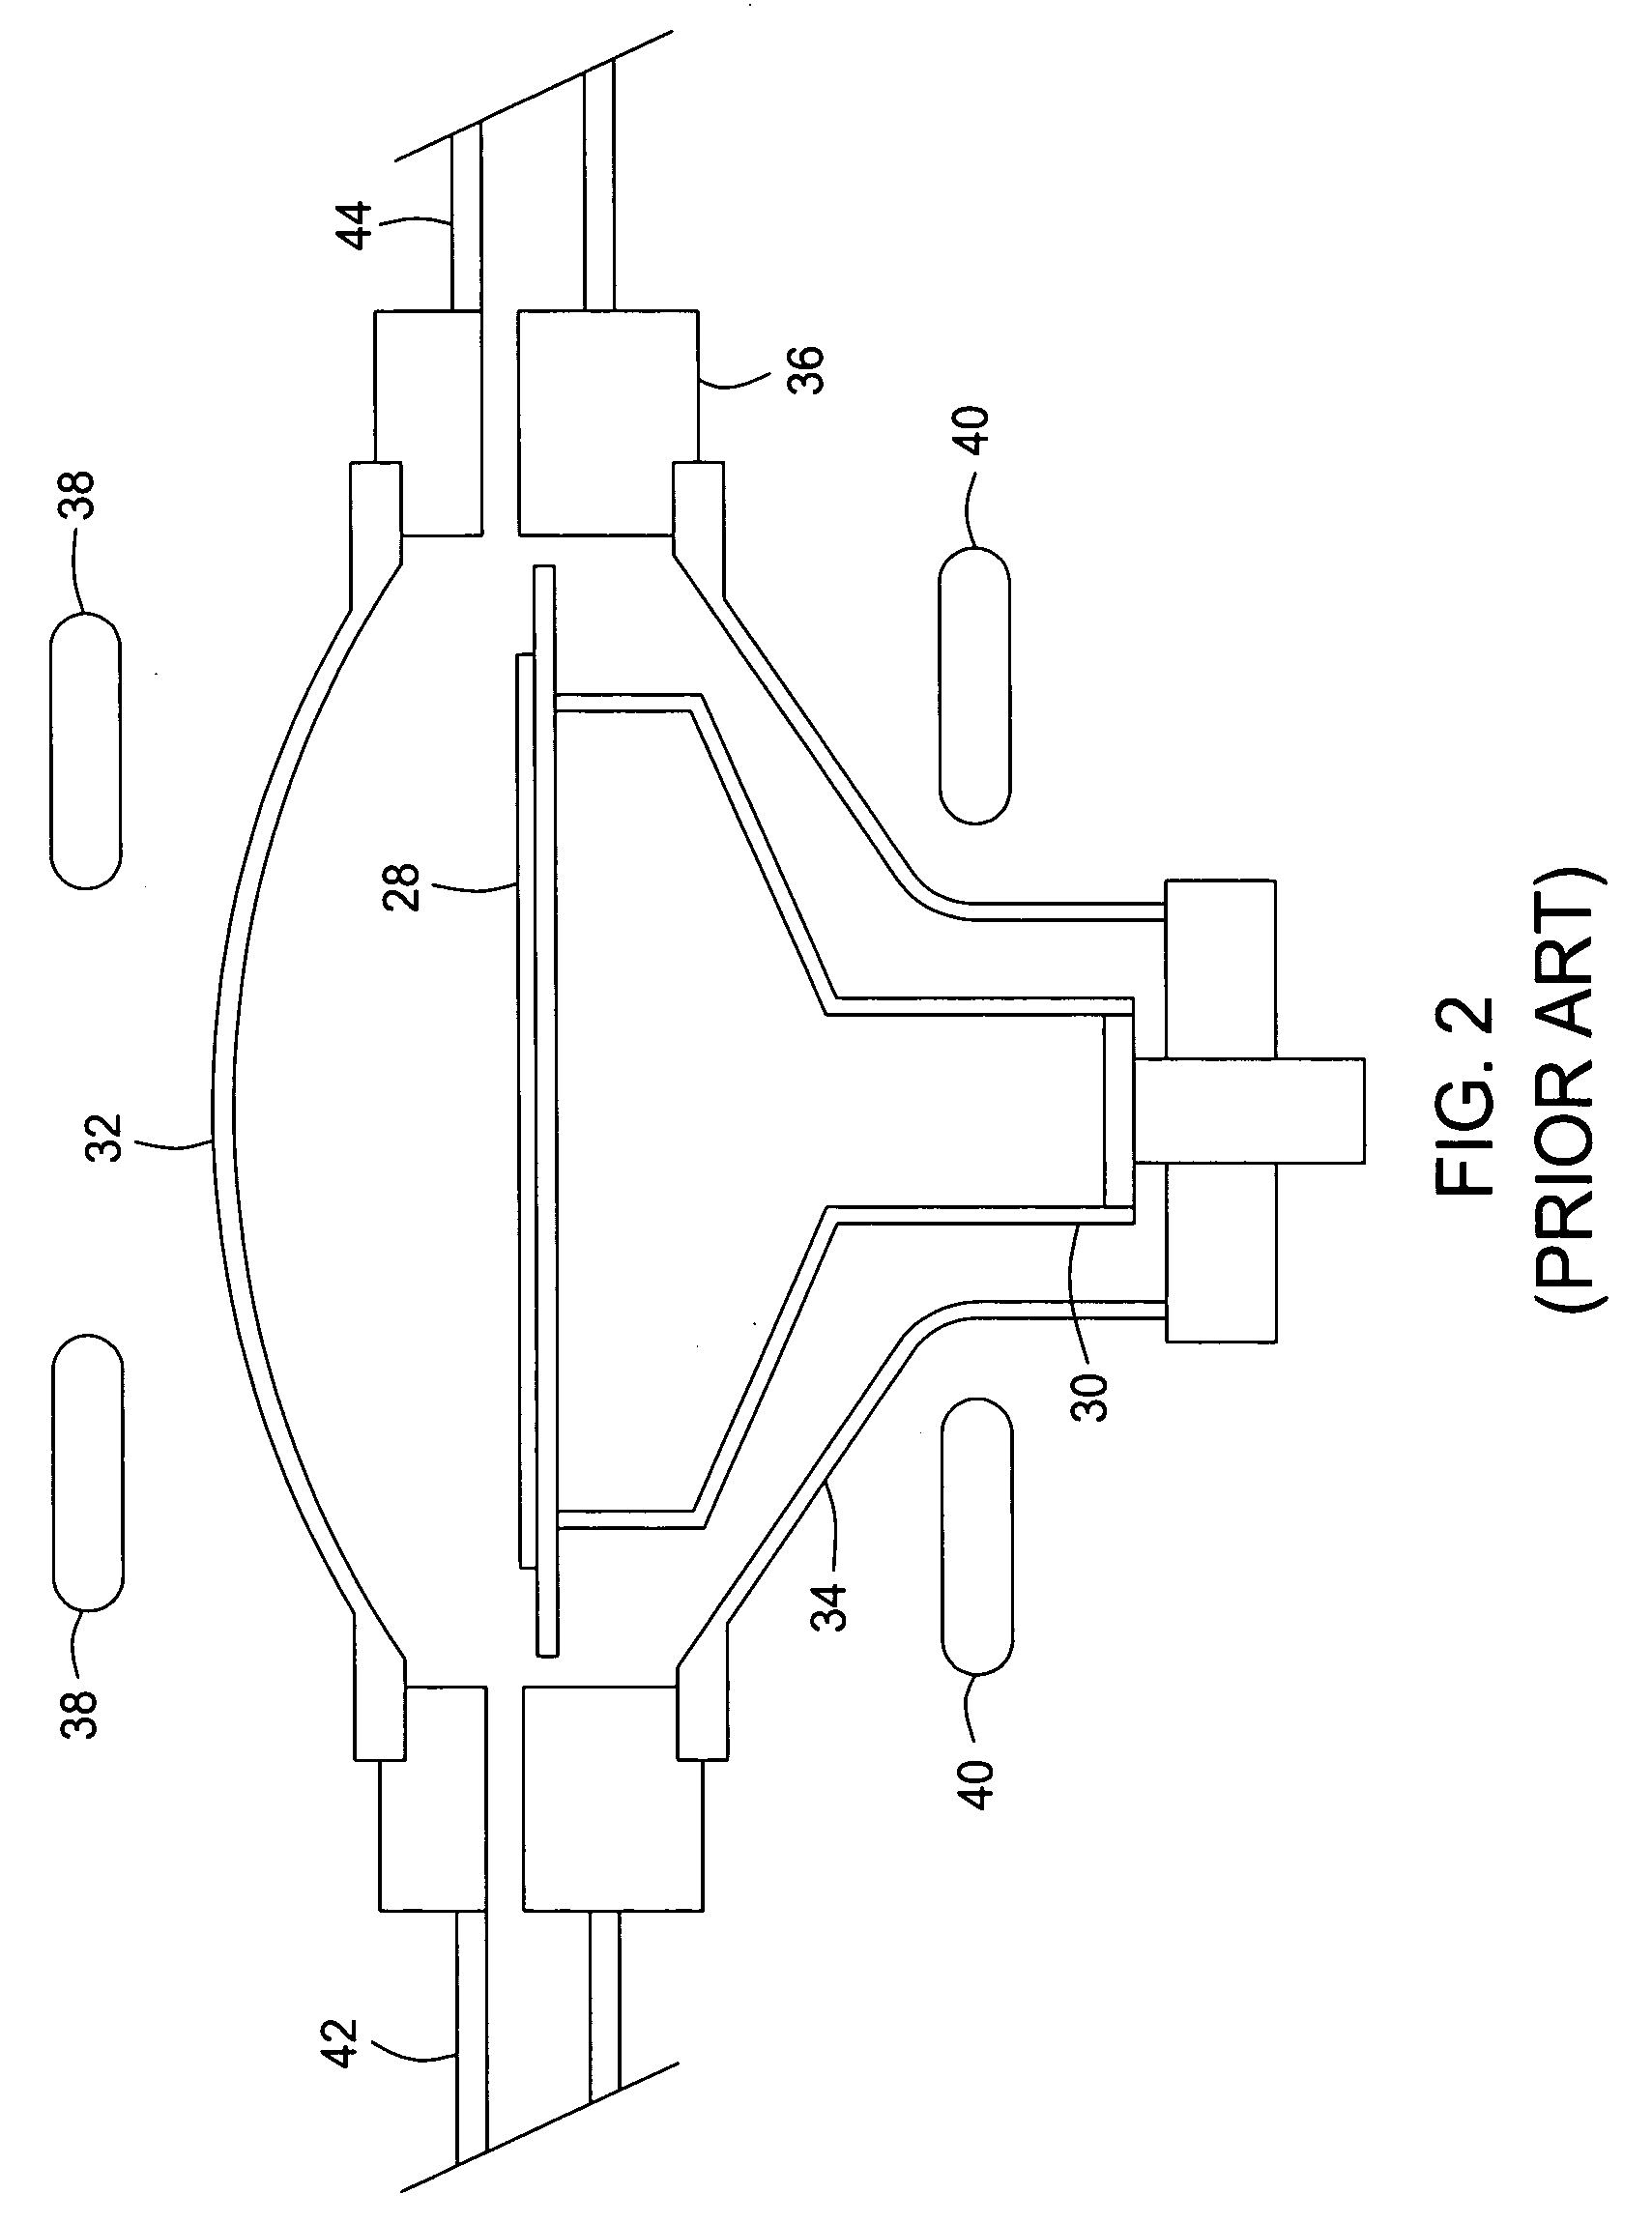 Process sequence for doped silicon fill of deep trenches